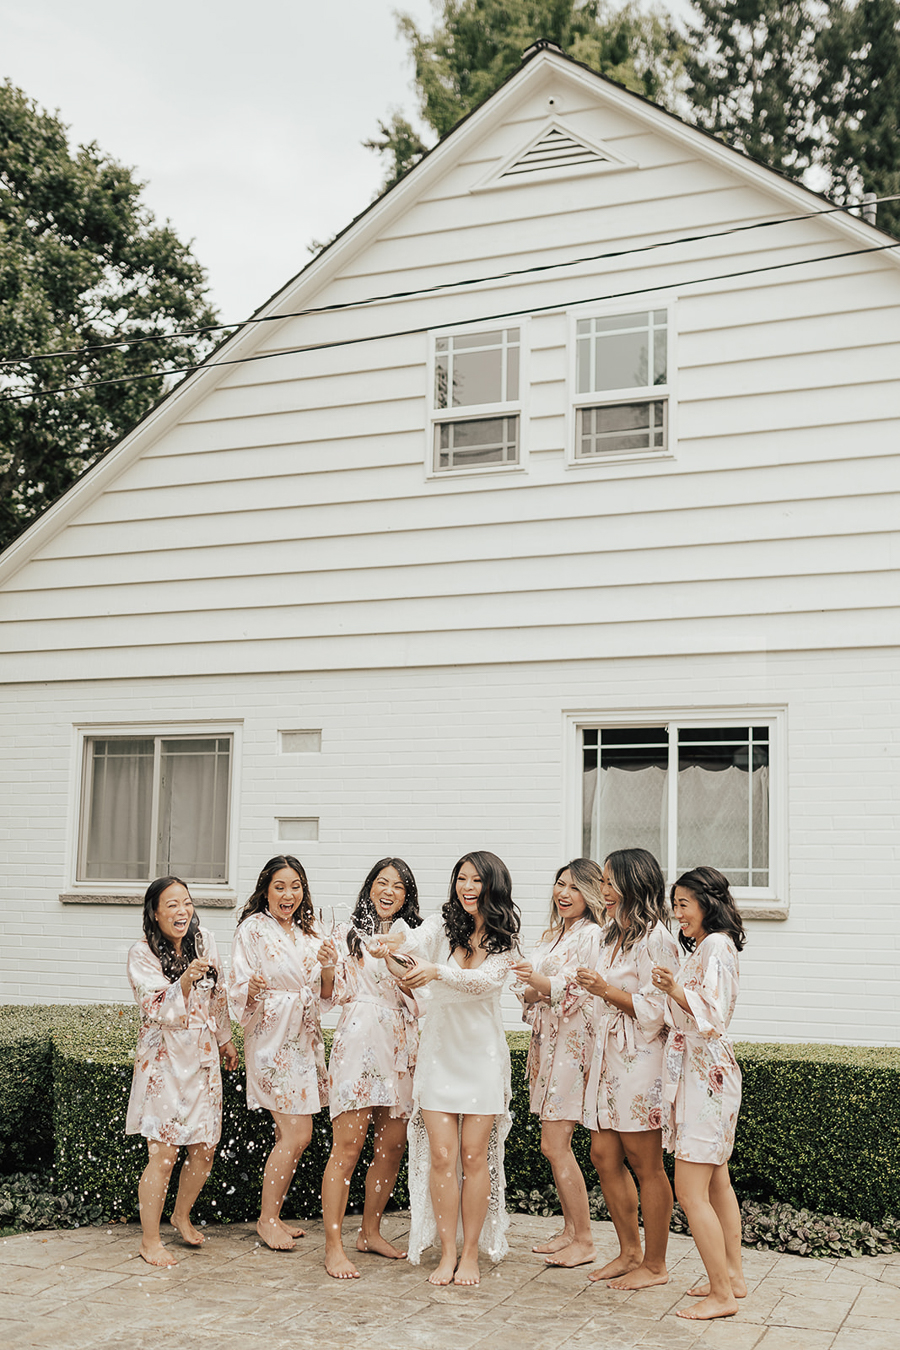 8 poses to take with your wedding party - getting ready photos, bridesmaids robes, popping champagne